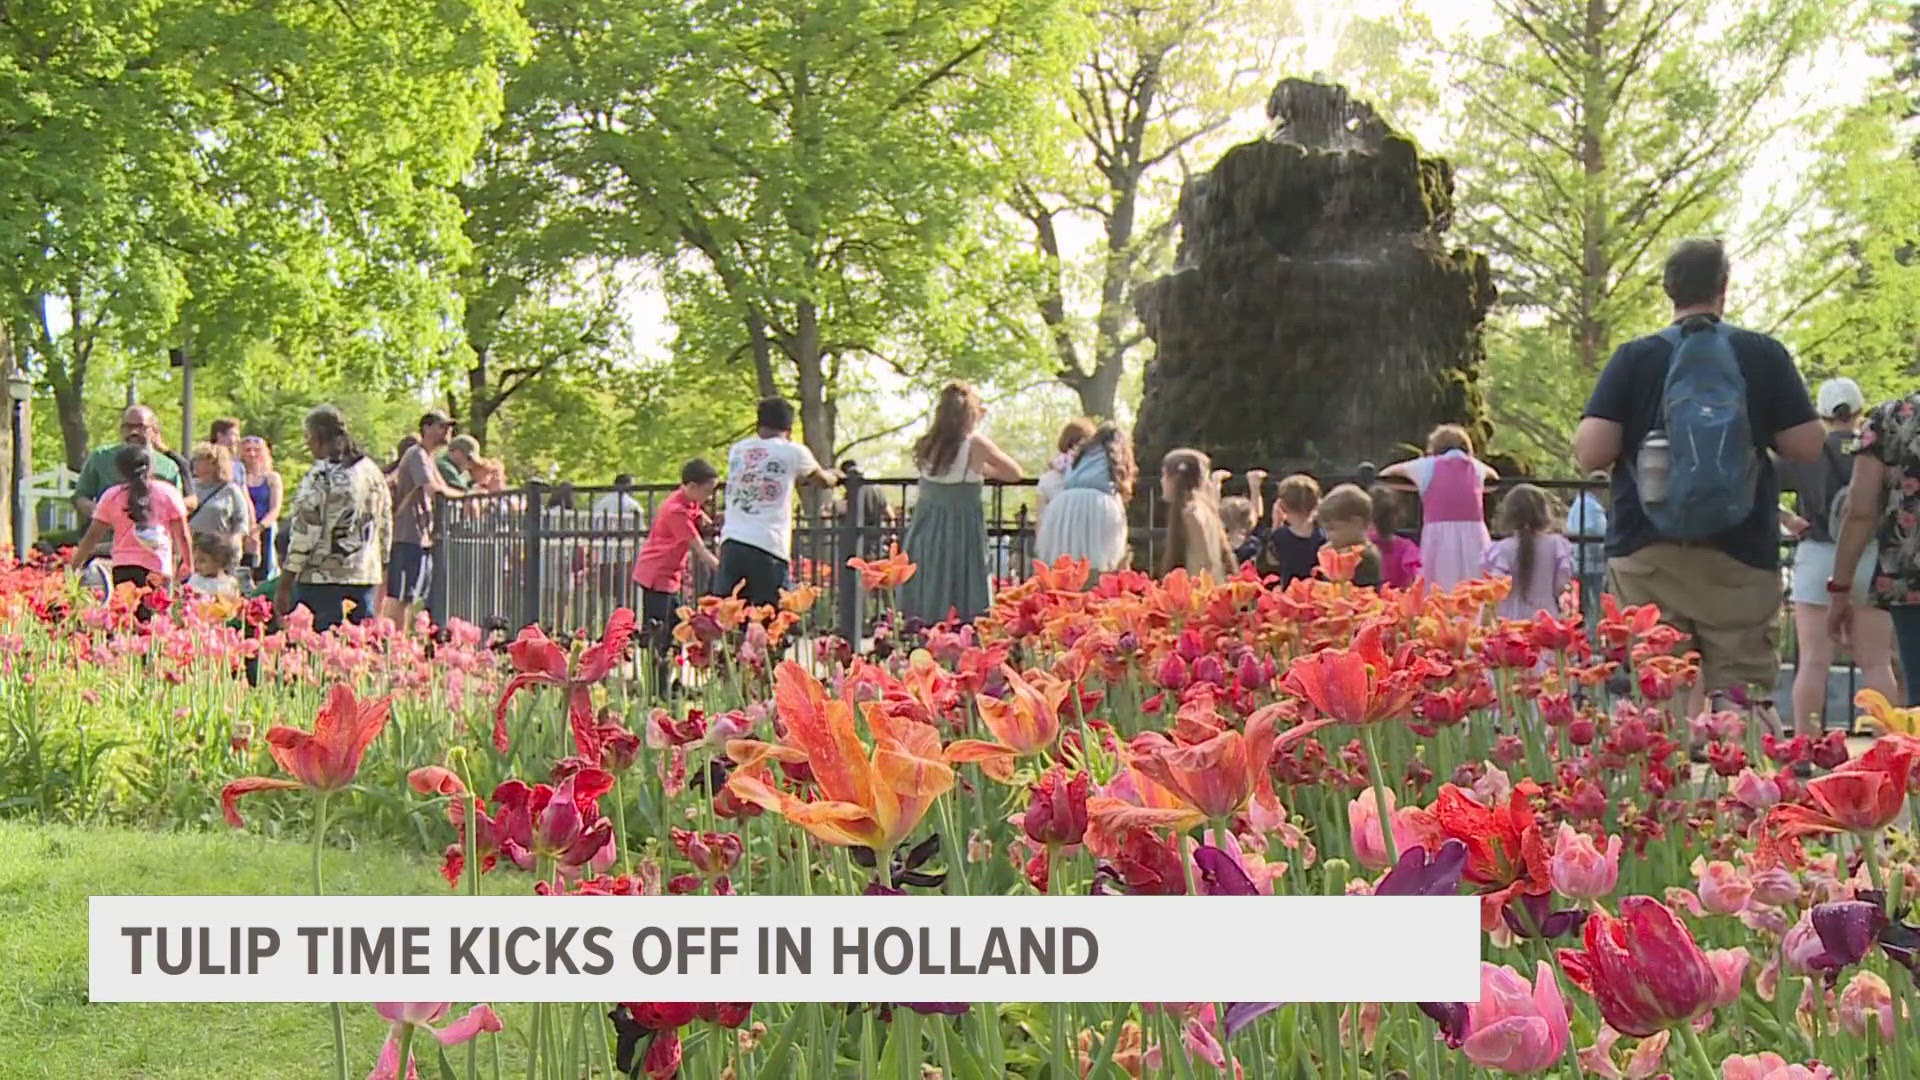 The sound of wooden shoes and music filled the streets of downtown Holland as crowds took in the tulips and the activities across the city.